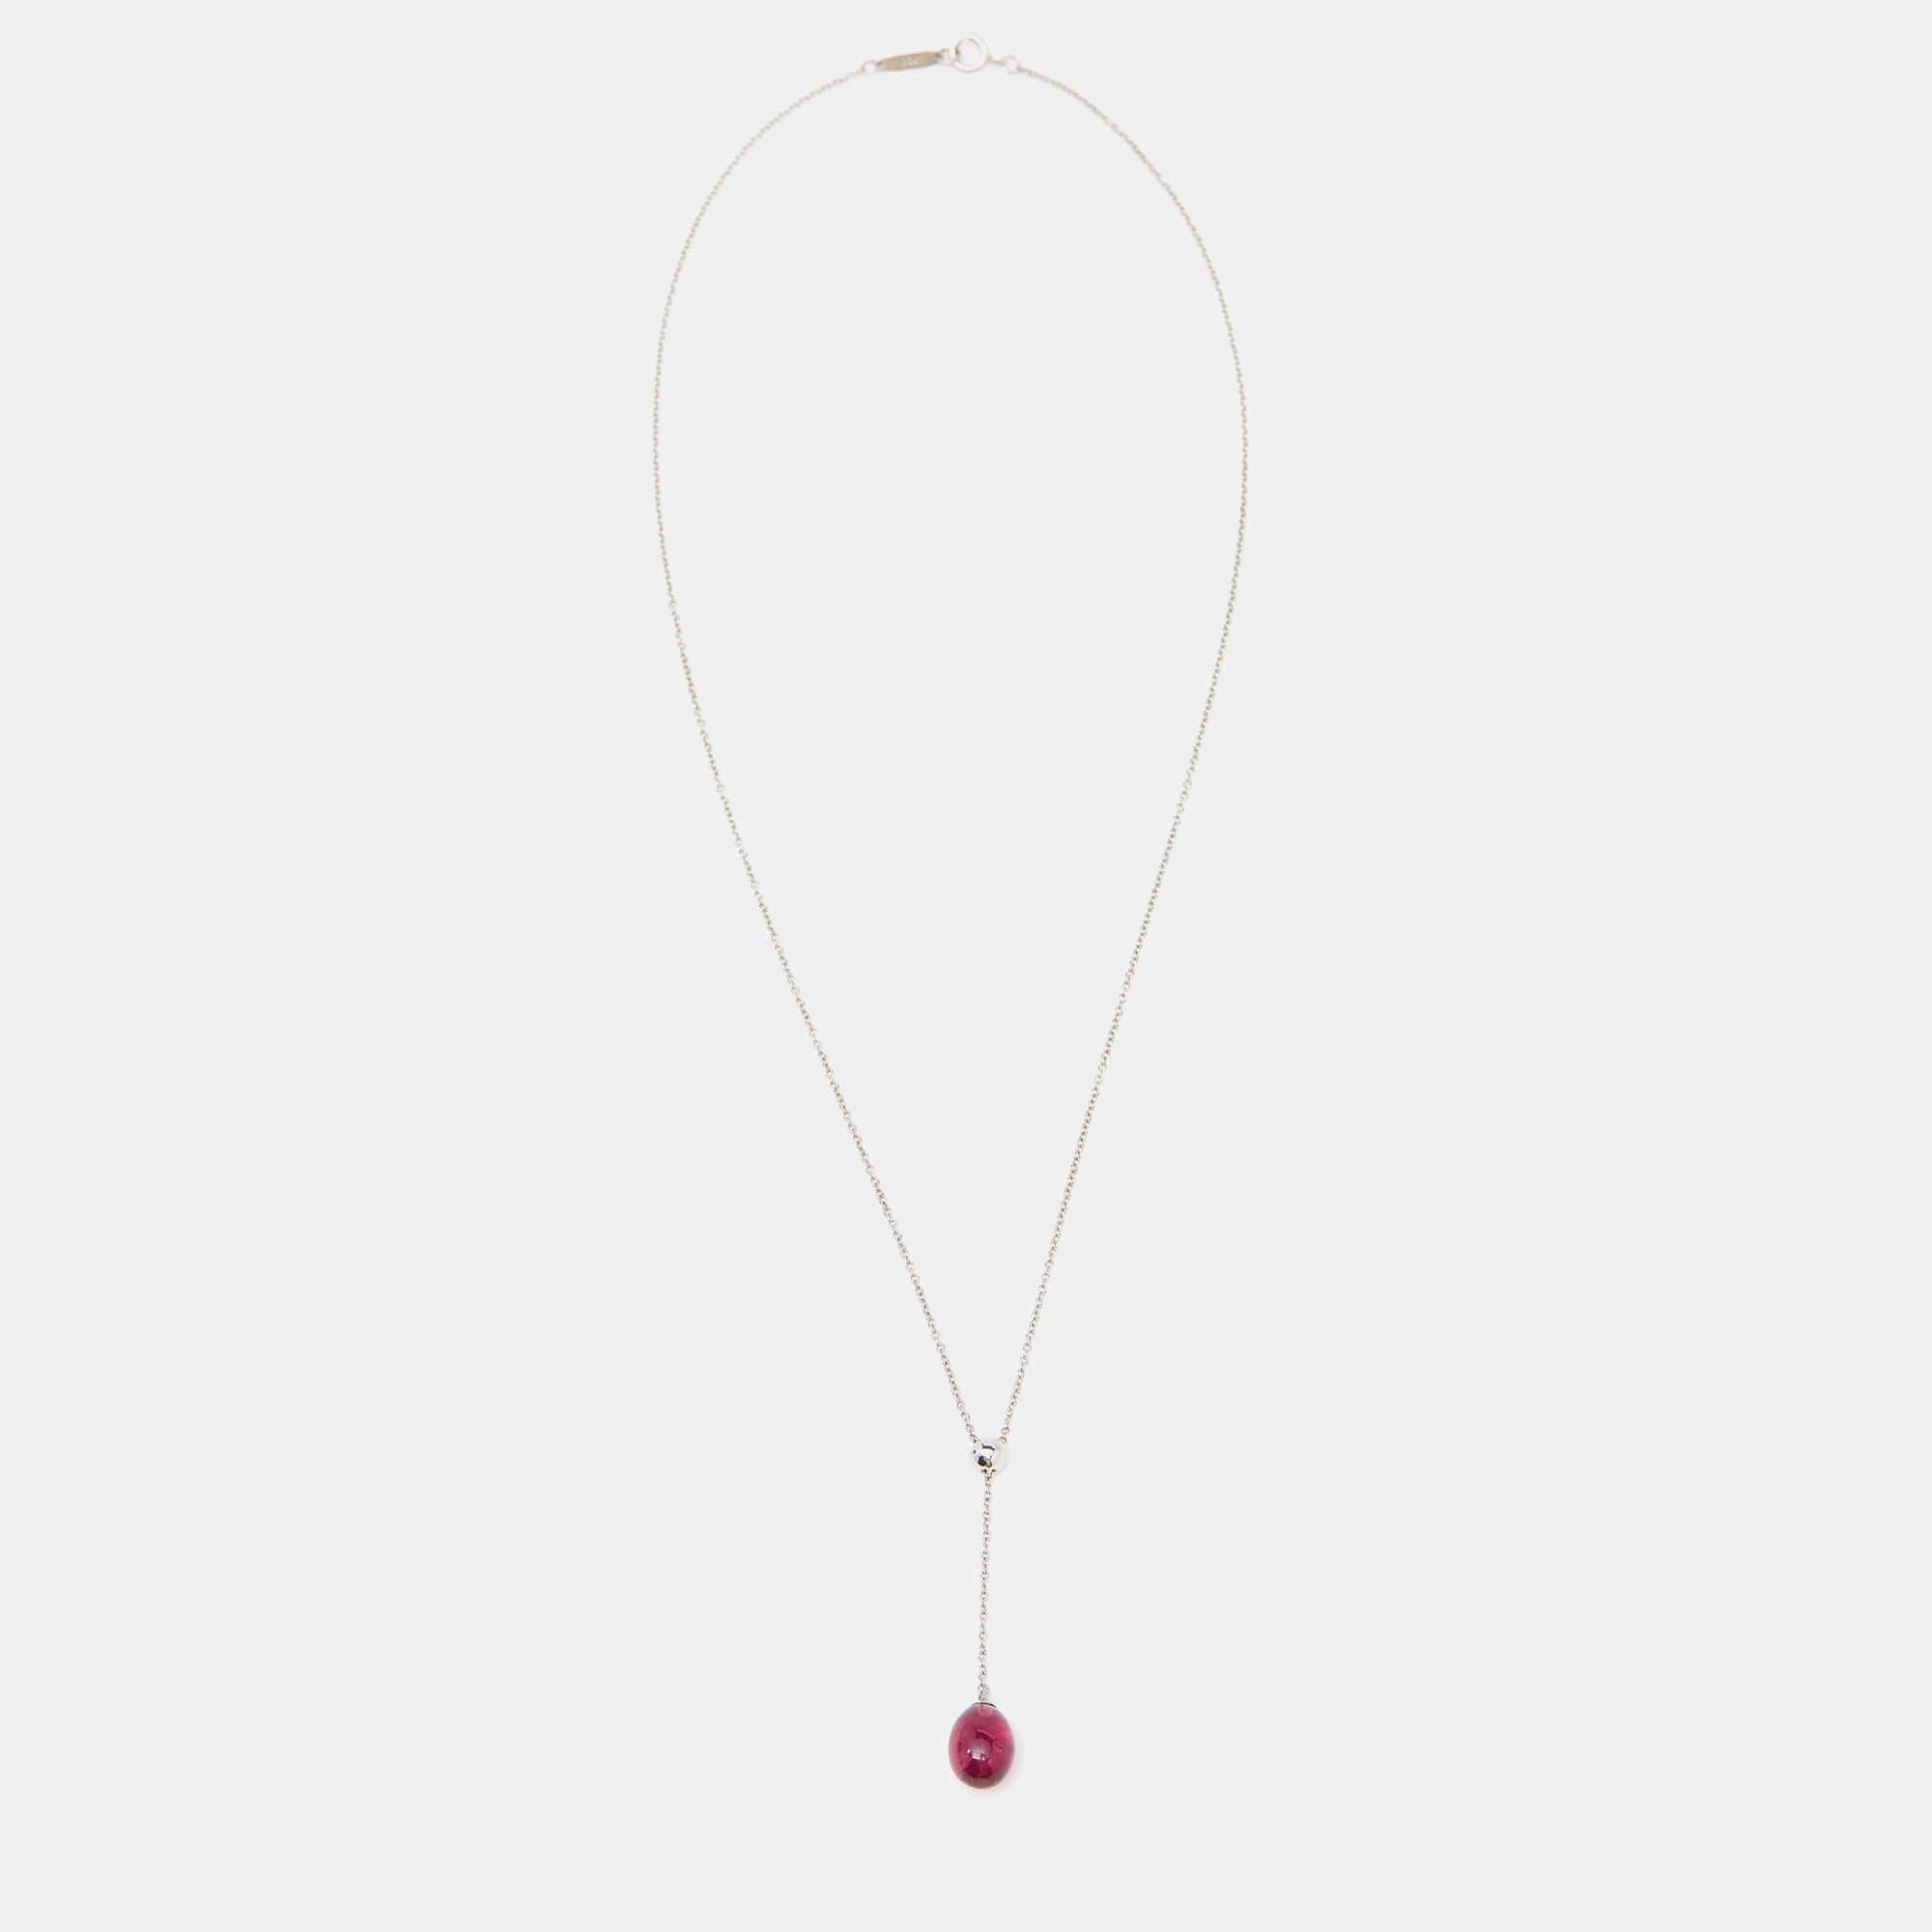 A delicate Tiffany beauty to highlight your neckline when you're wearing your favorite outfits! The necklace is of 18k white gold and has a stunning tourmaline drop that draws all attention.

